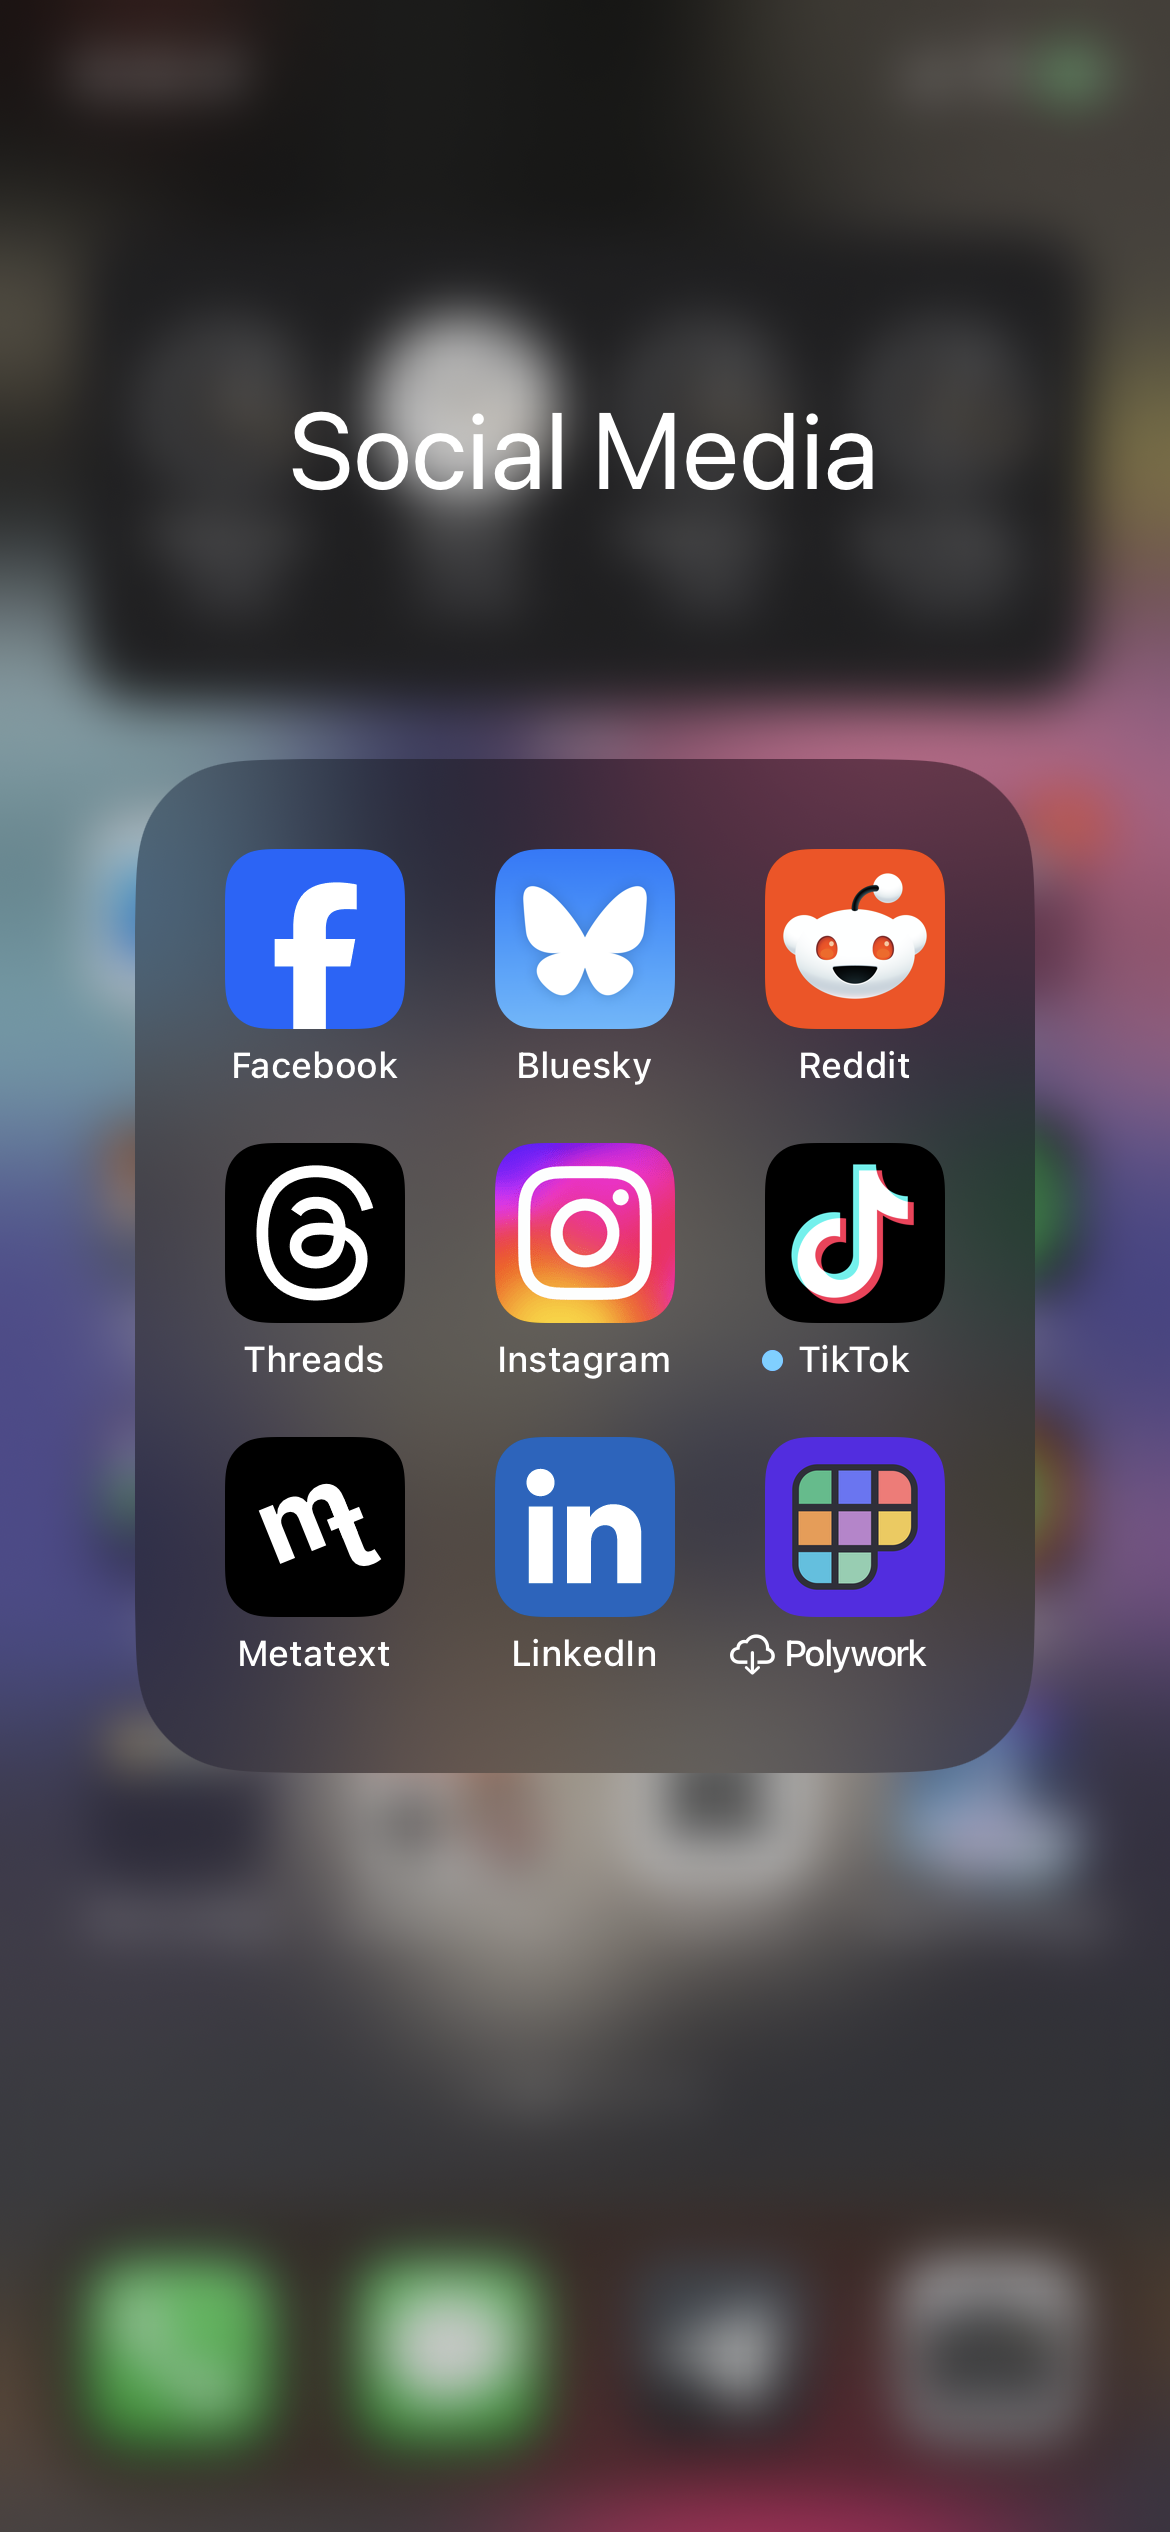 Screenshot of Chi's group of app icons labeled "Social Media", with the following apps shown in a 3 by 3 grid, from top to bottom, left to right: Facebook, BlueSky, Reddit, Threads, Instagram, TikTok, Metatext, LinkedIn, and Polywork.